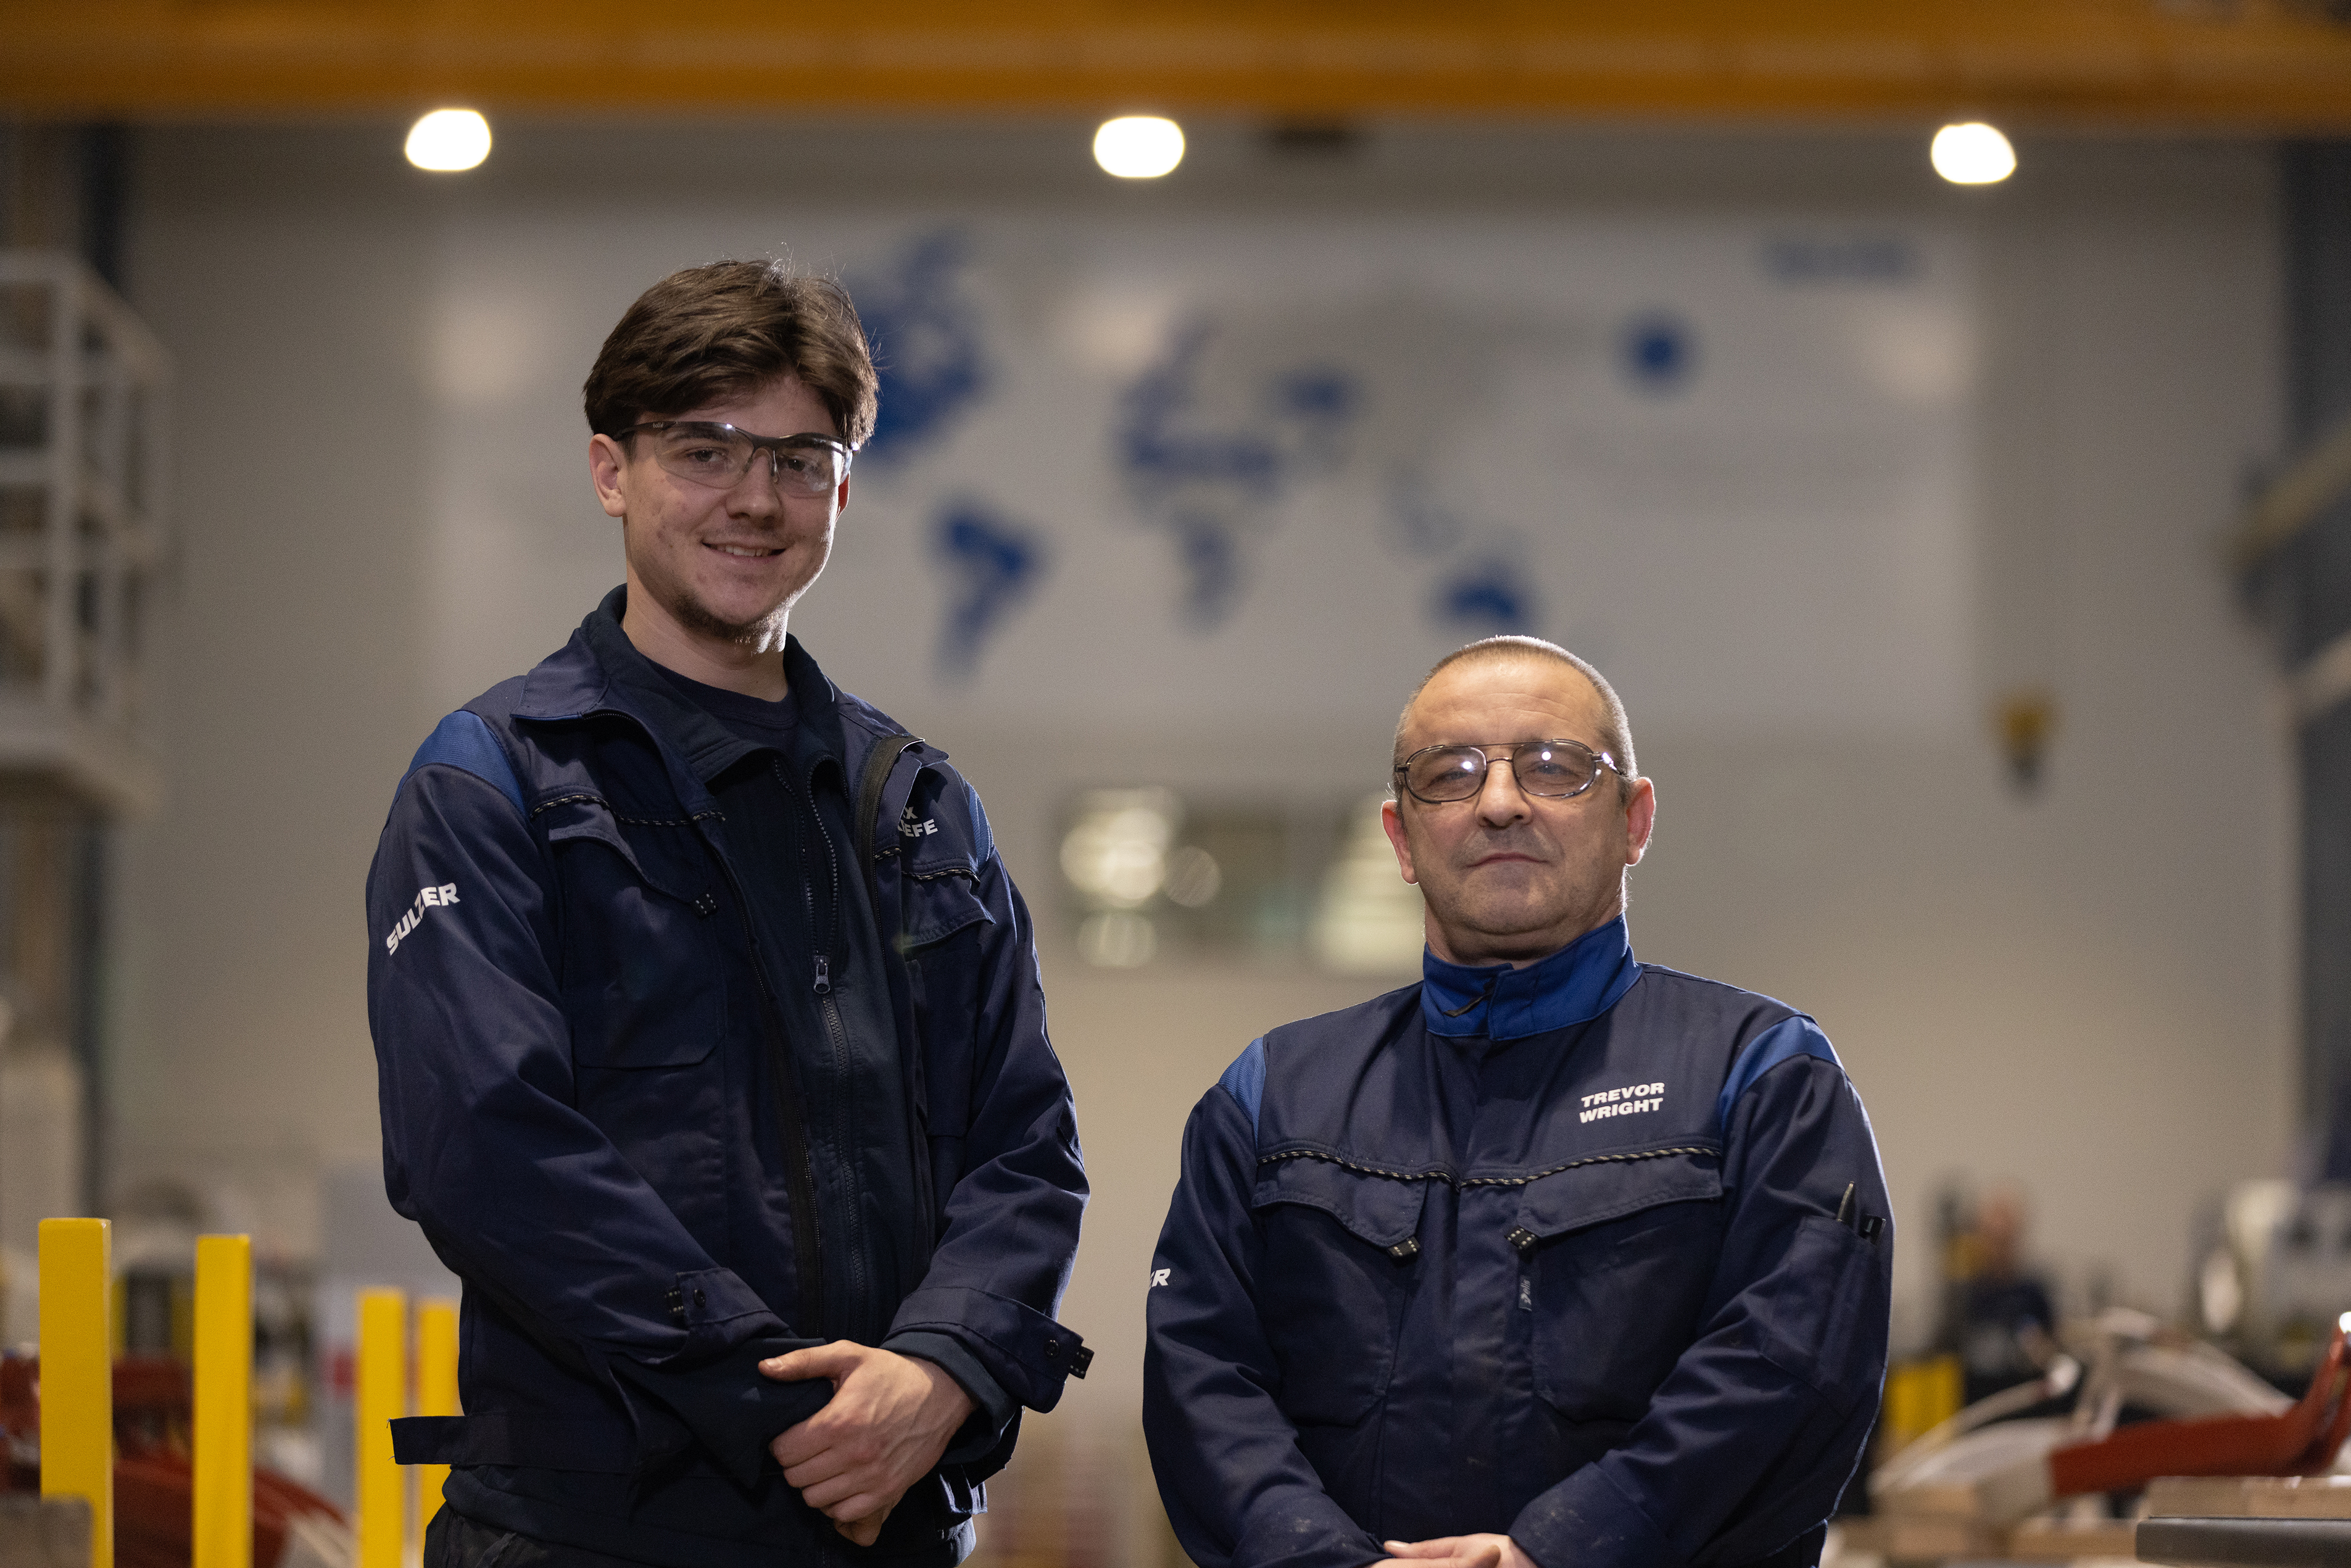 Sulzer offers a wide variety of fully-funded Level 3 apprenticeships